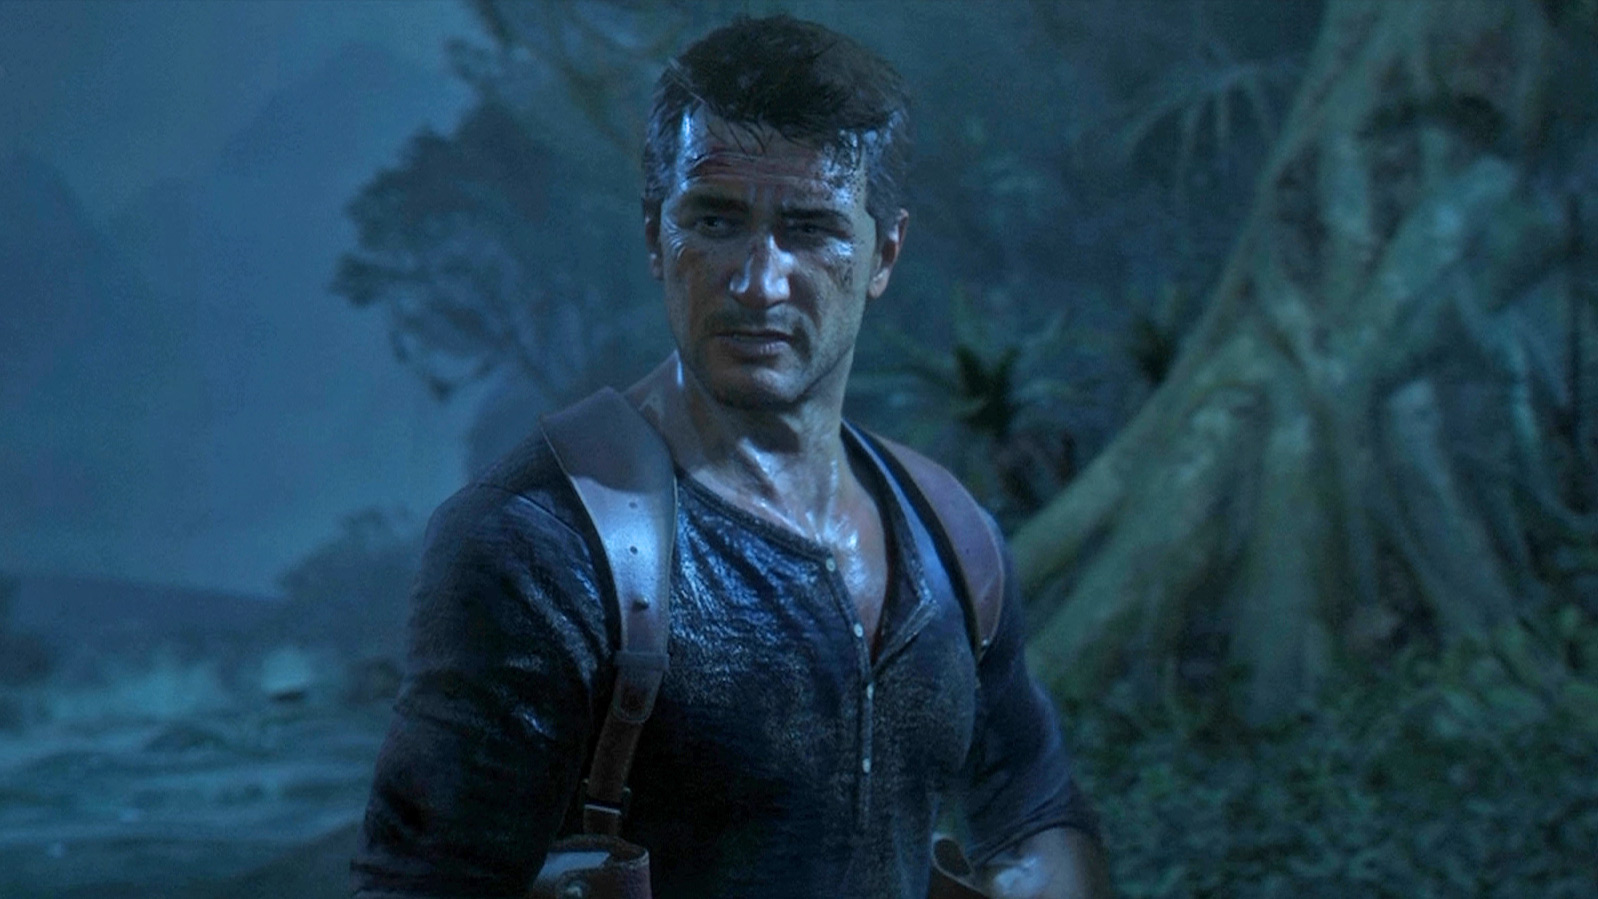 “Uncharted 4” Delayed to Spring 2016 - Nathan Drake Will Have His Day Later